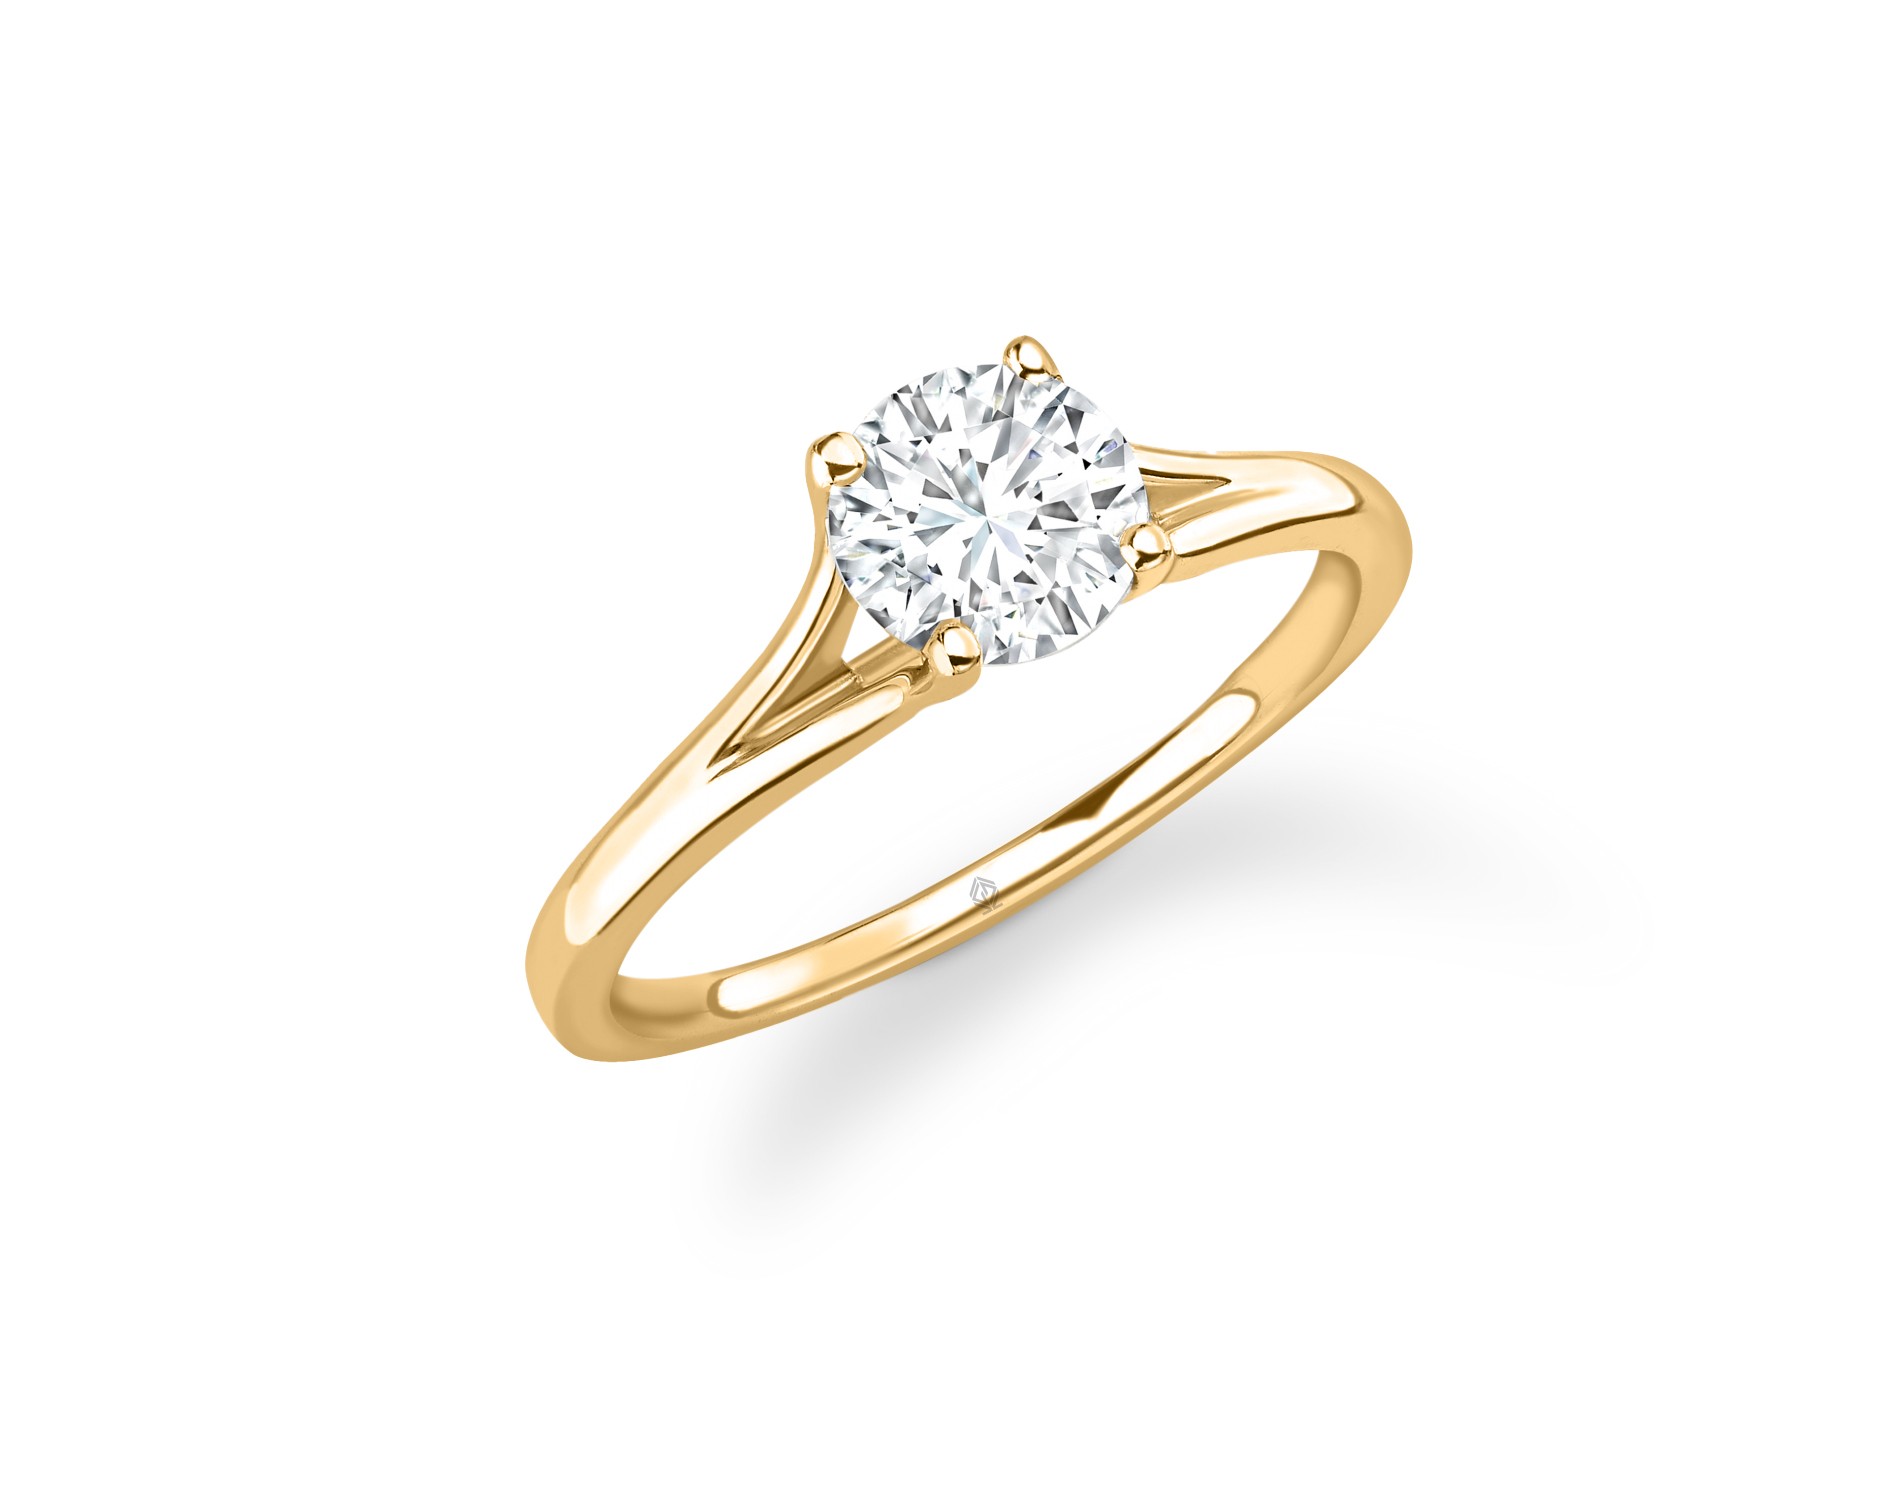 18K YELLOW GOLD 4 PRONGS SOLITAIRE ROUND CUT DIAMOND ENGAGEMENT RING WITH SPLIT SHANK